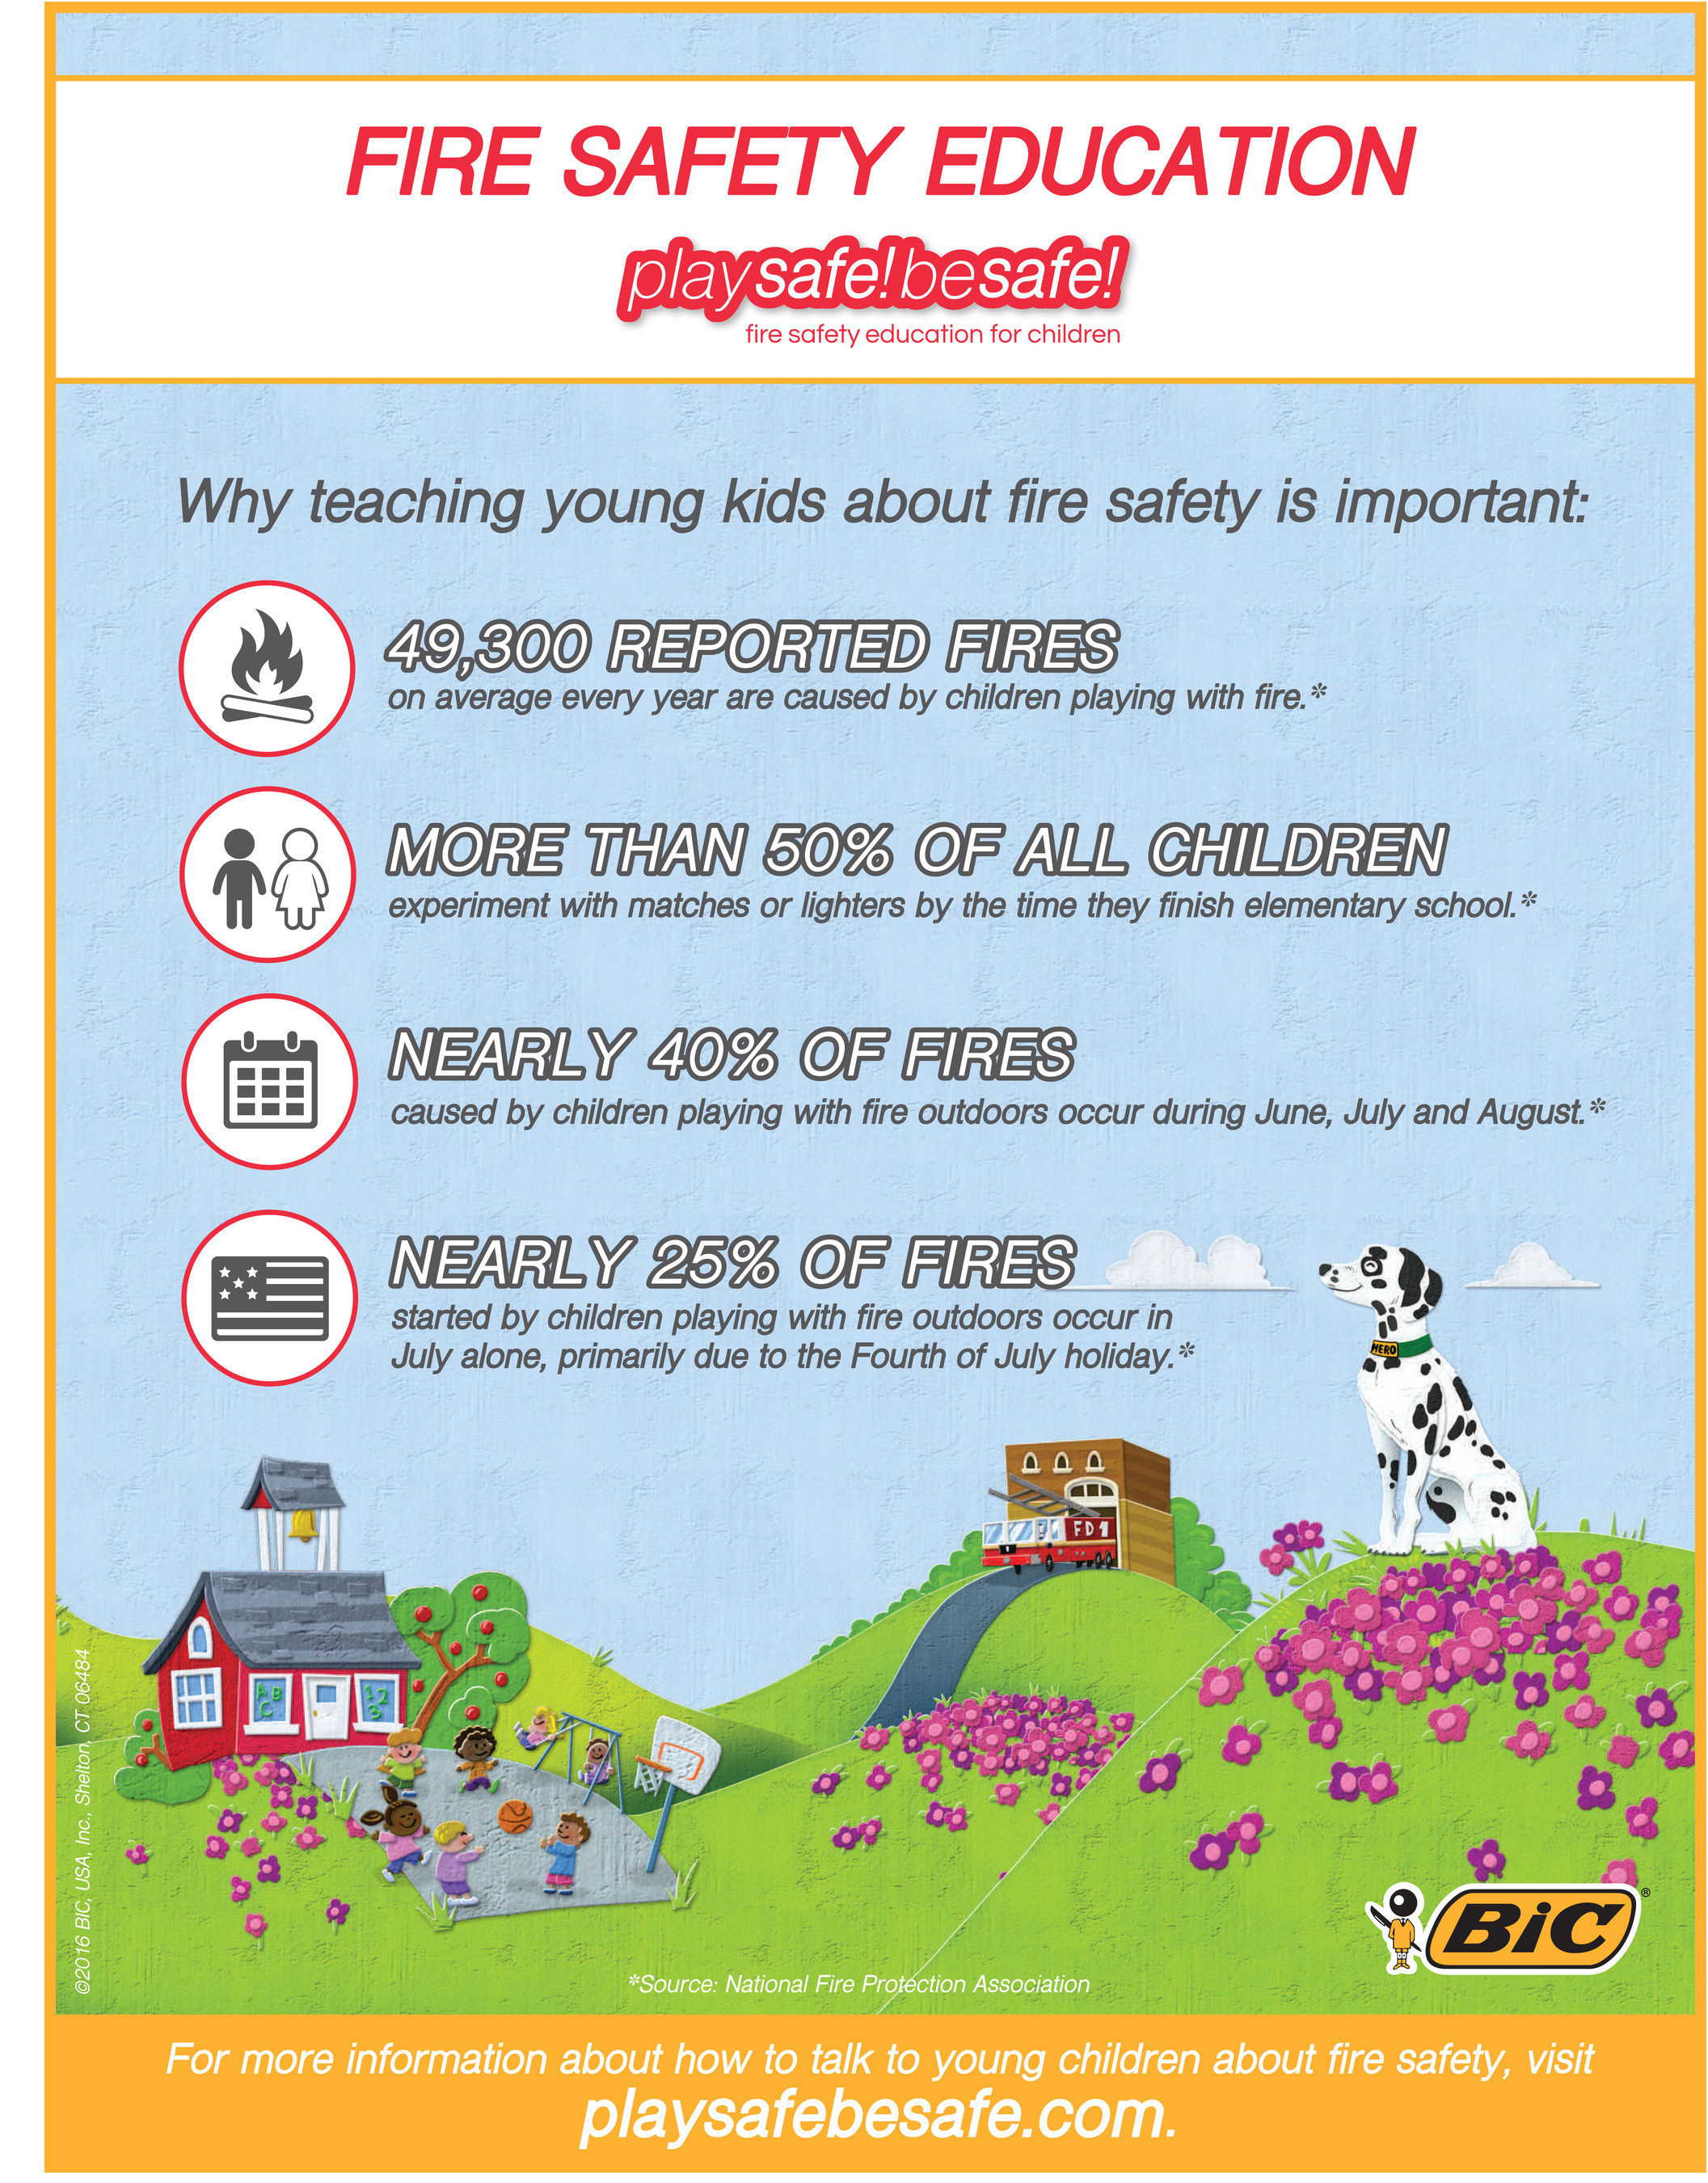 Why Teaching Young Children About Fire Safety Education is Important. For more information about talking to young children about fire safety, visit www.playsafebesafe.com